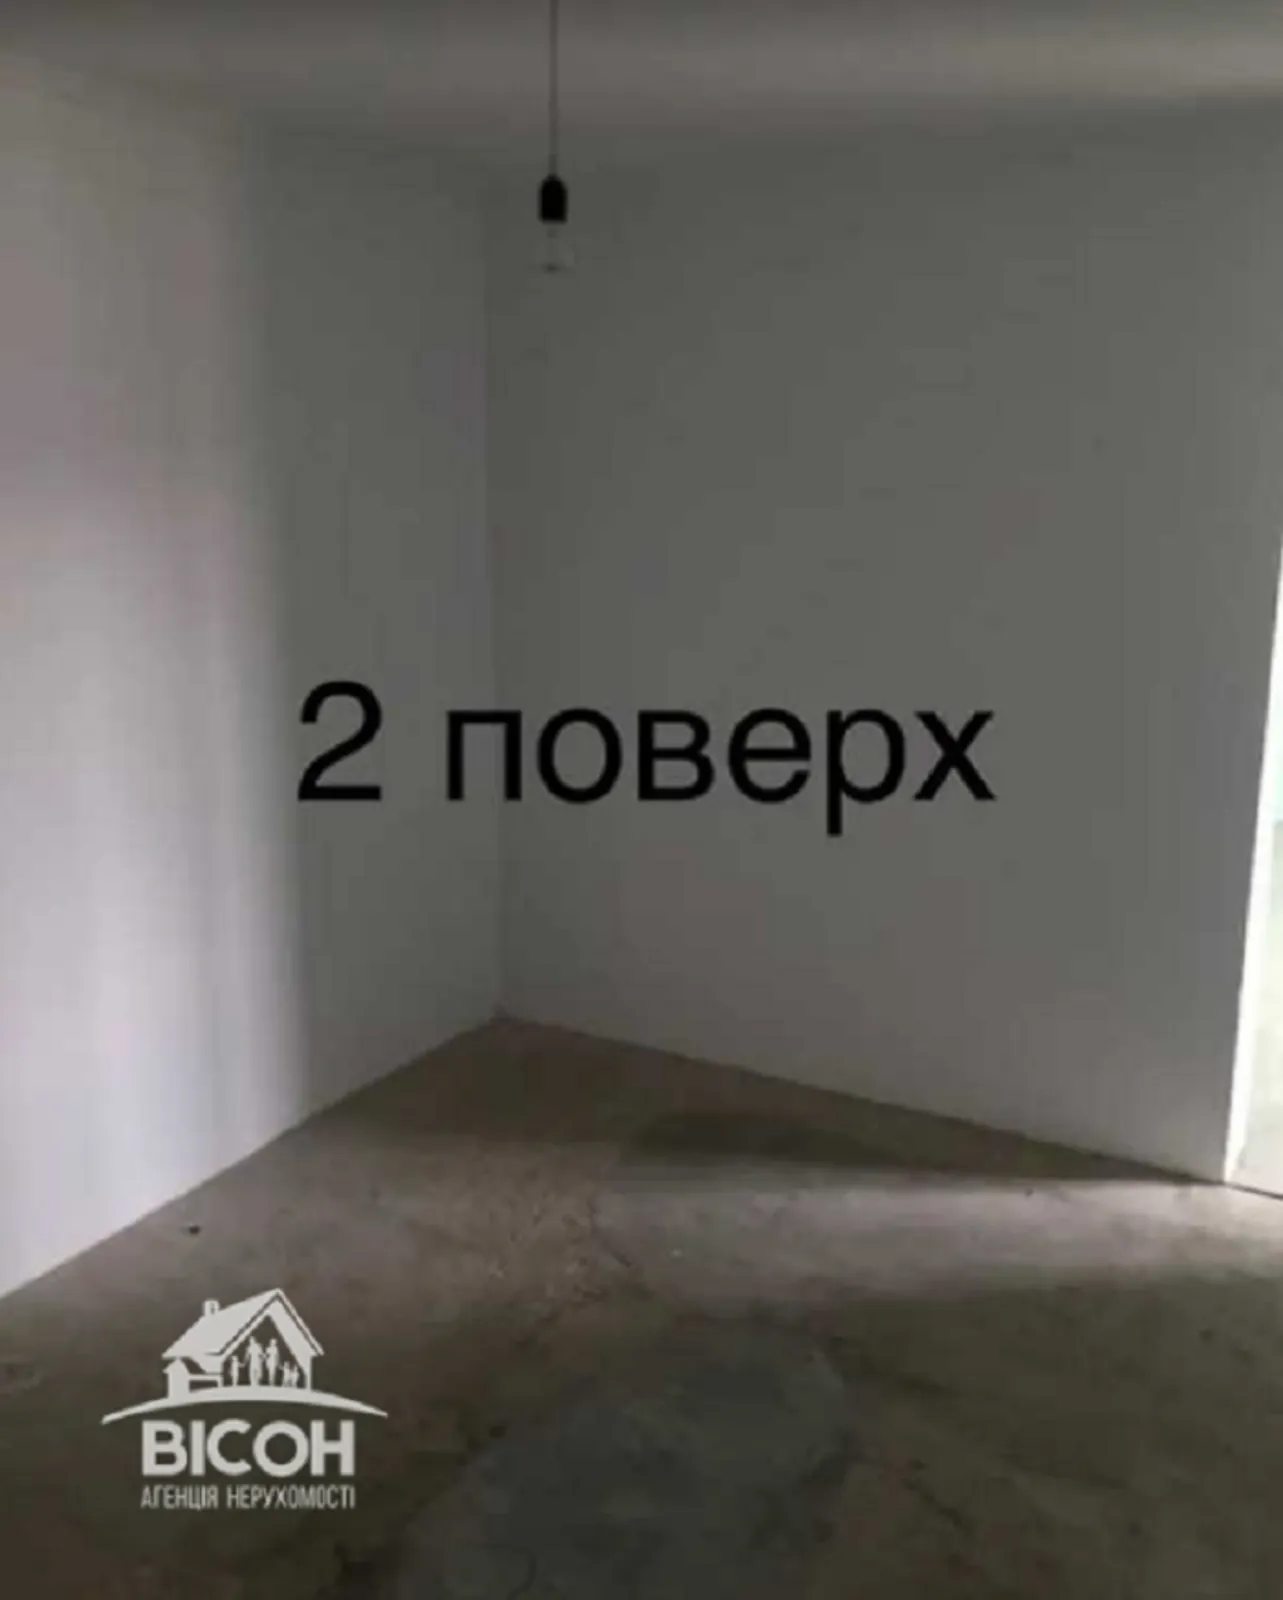 House for sale. 144 m², 2 floors. Petrykov. 